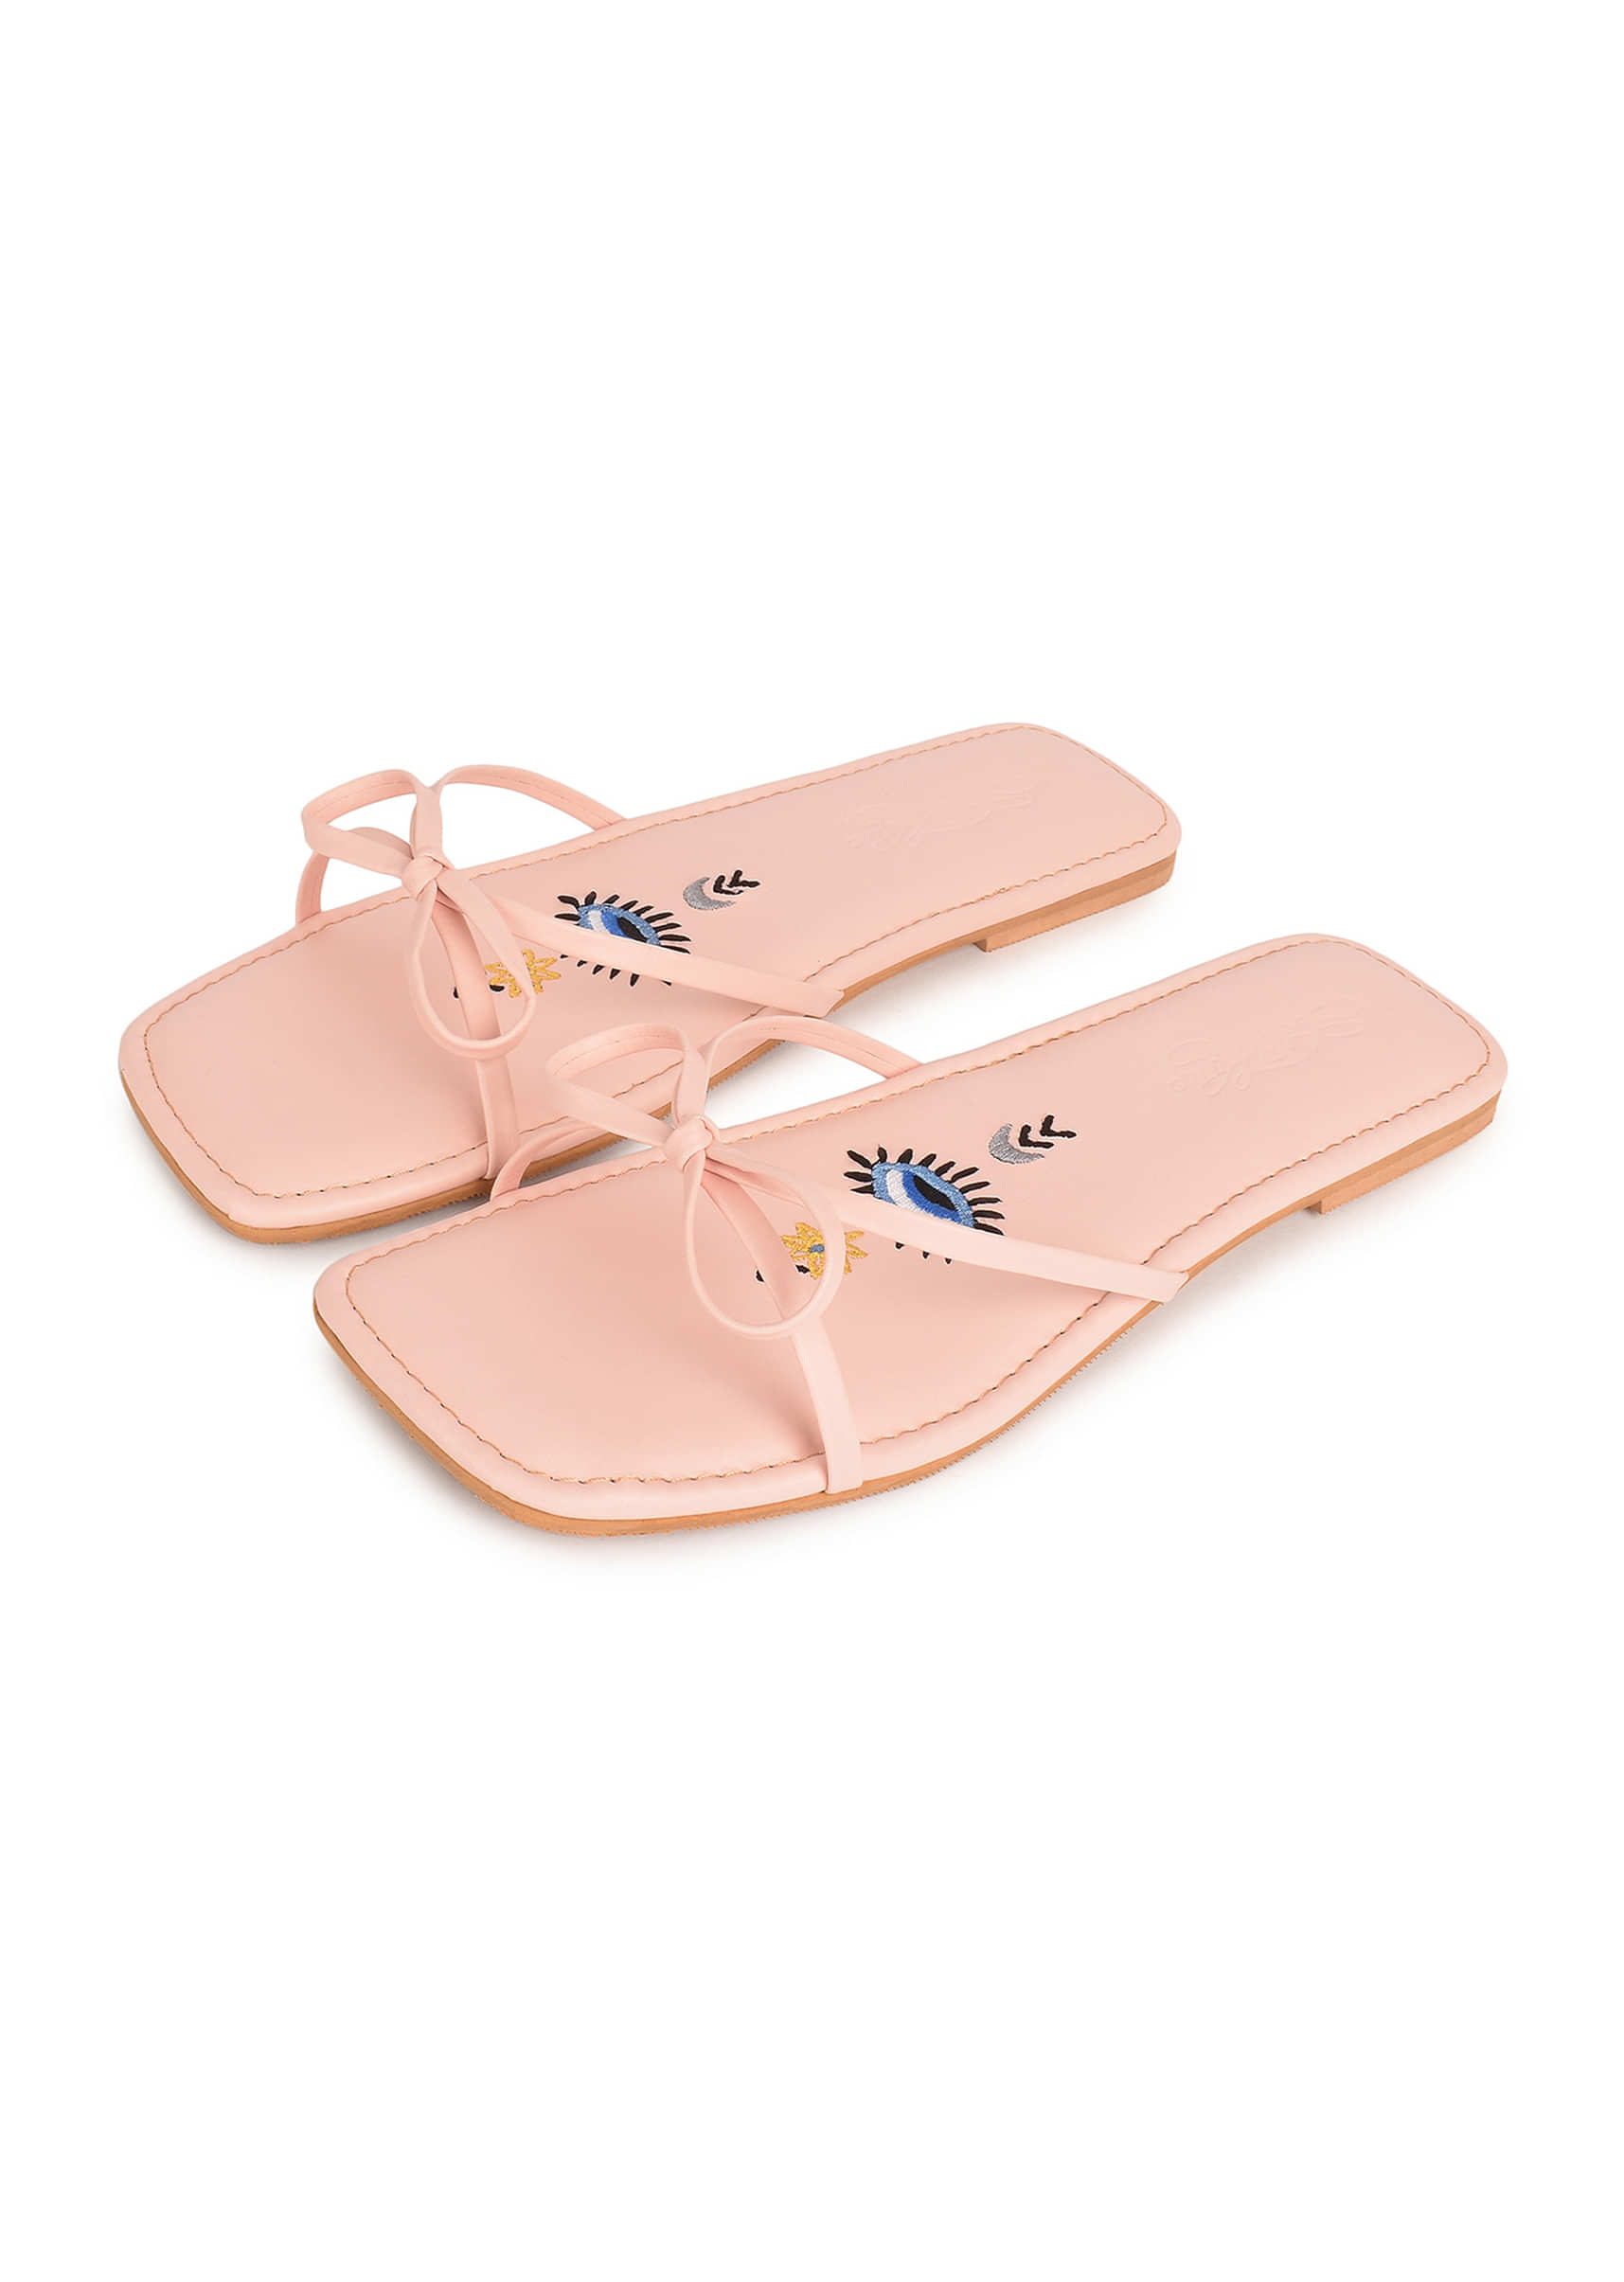 Pastel Pink Flats With Bow Detailing And Evil Eye Motif By Sole House